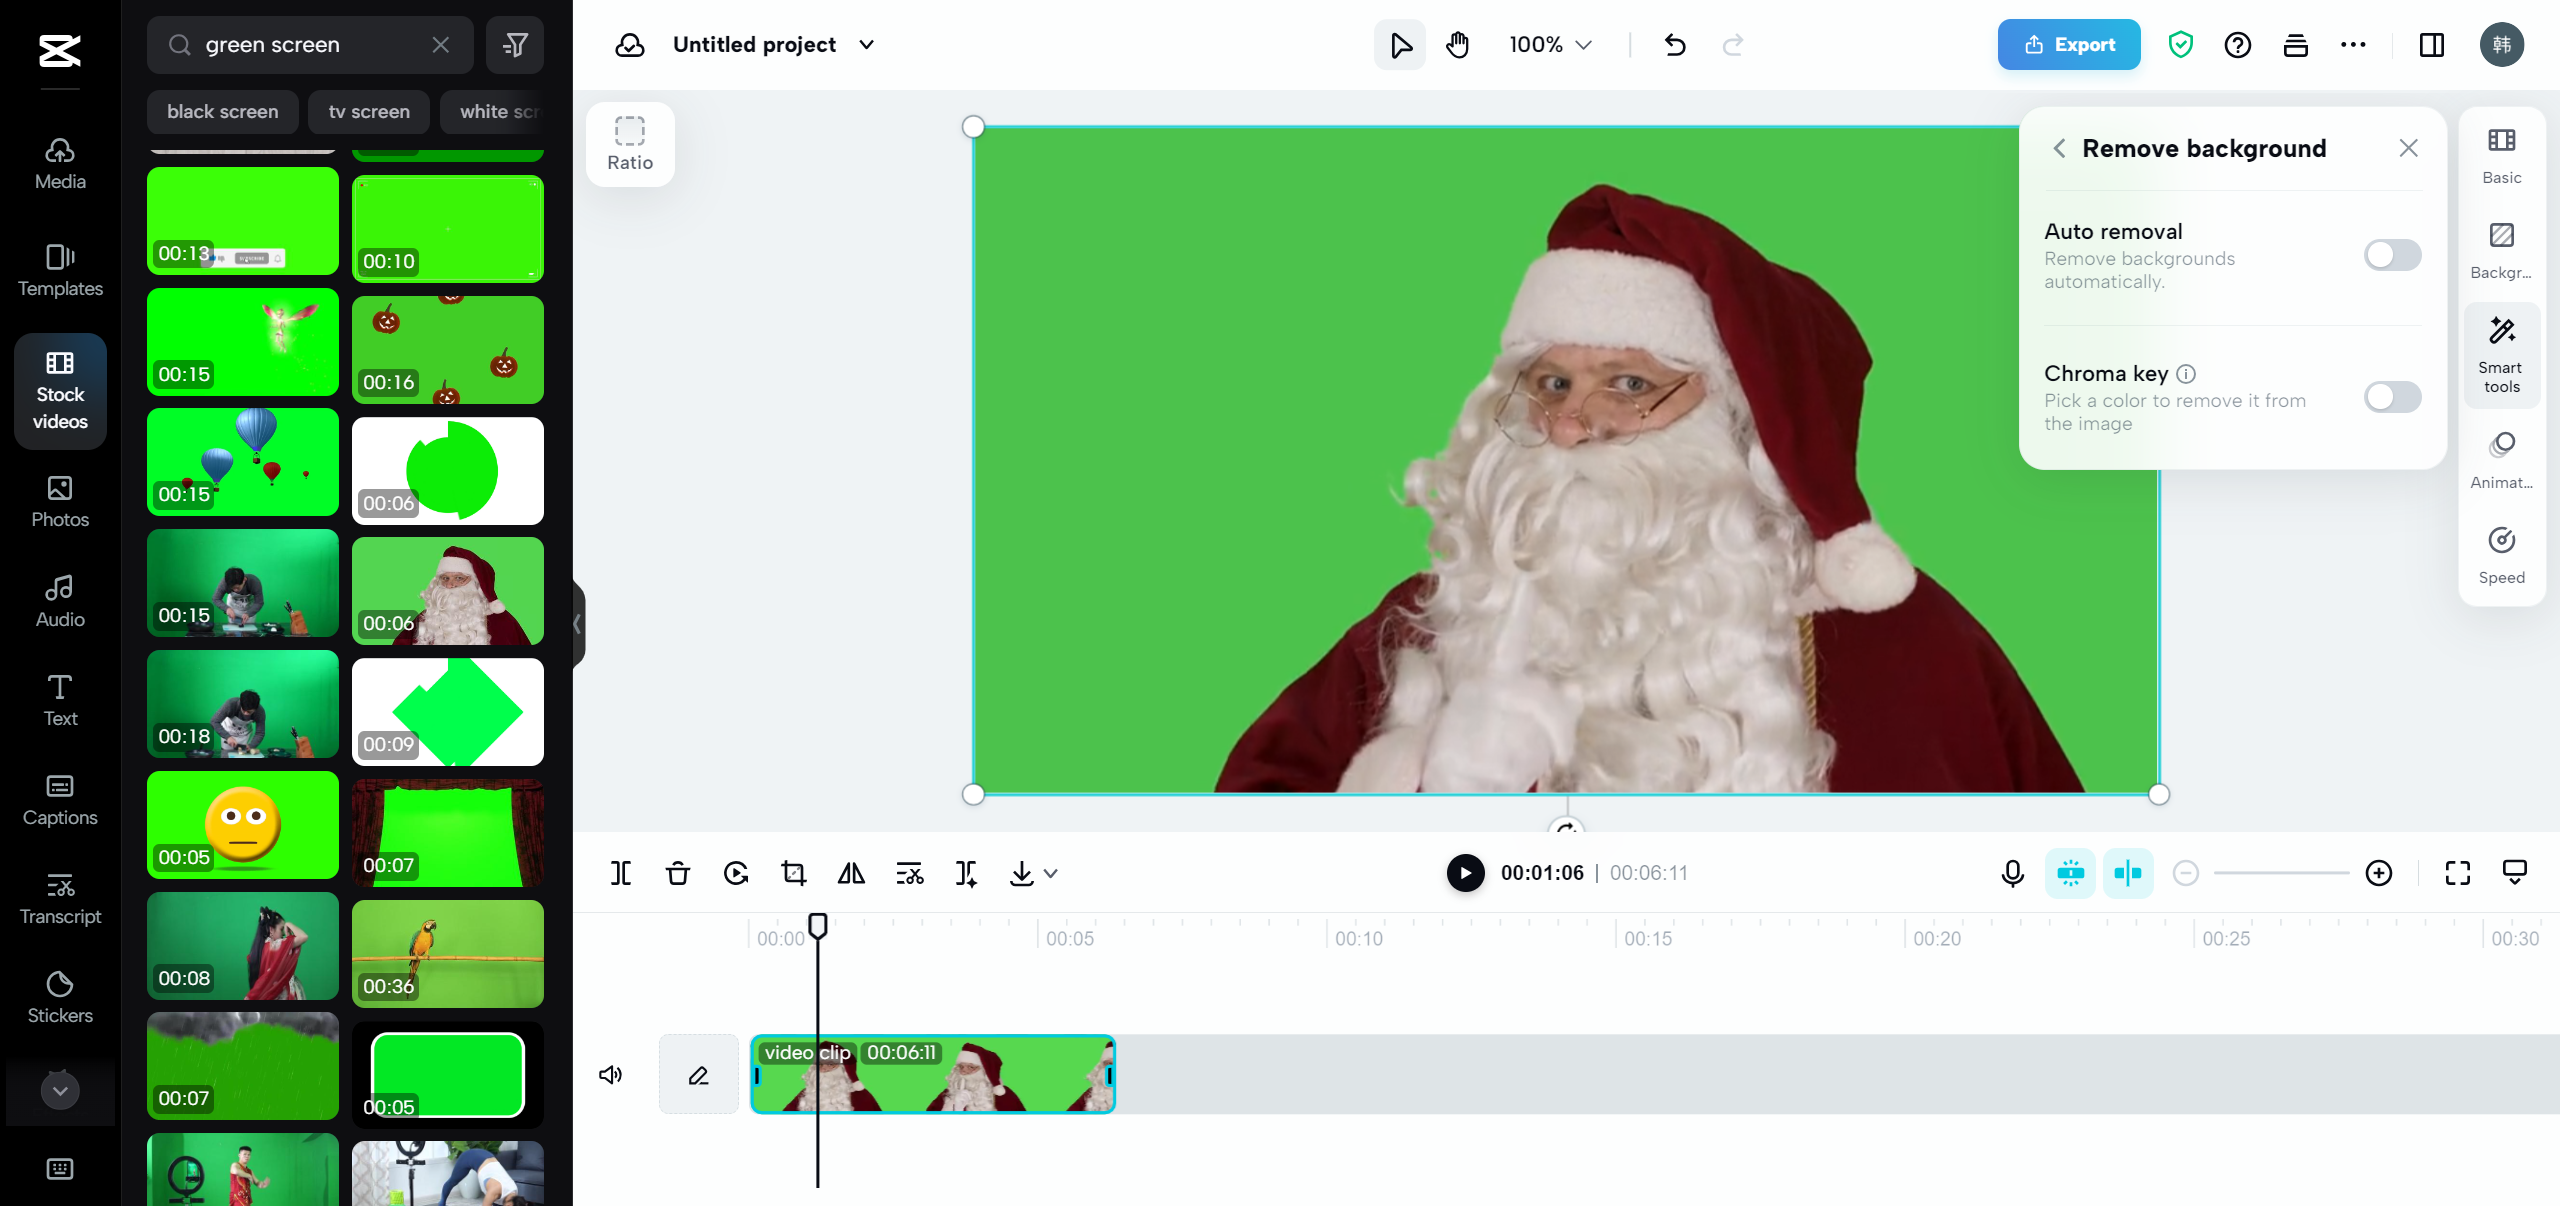 The alternative way to edit the green screen: Use CapCut online video editor